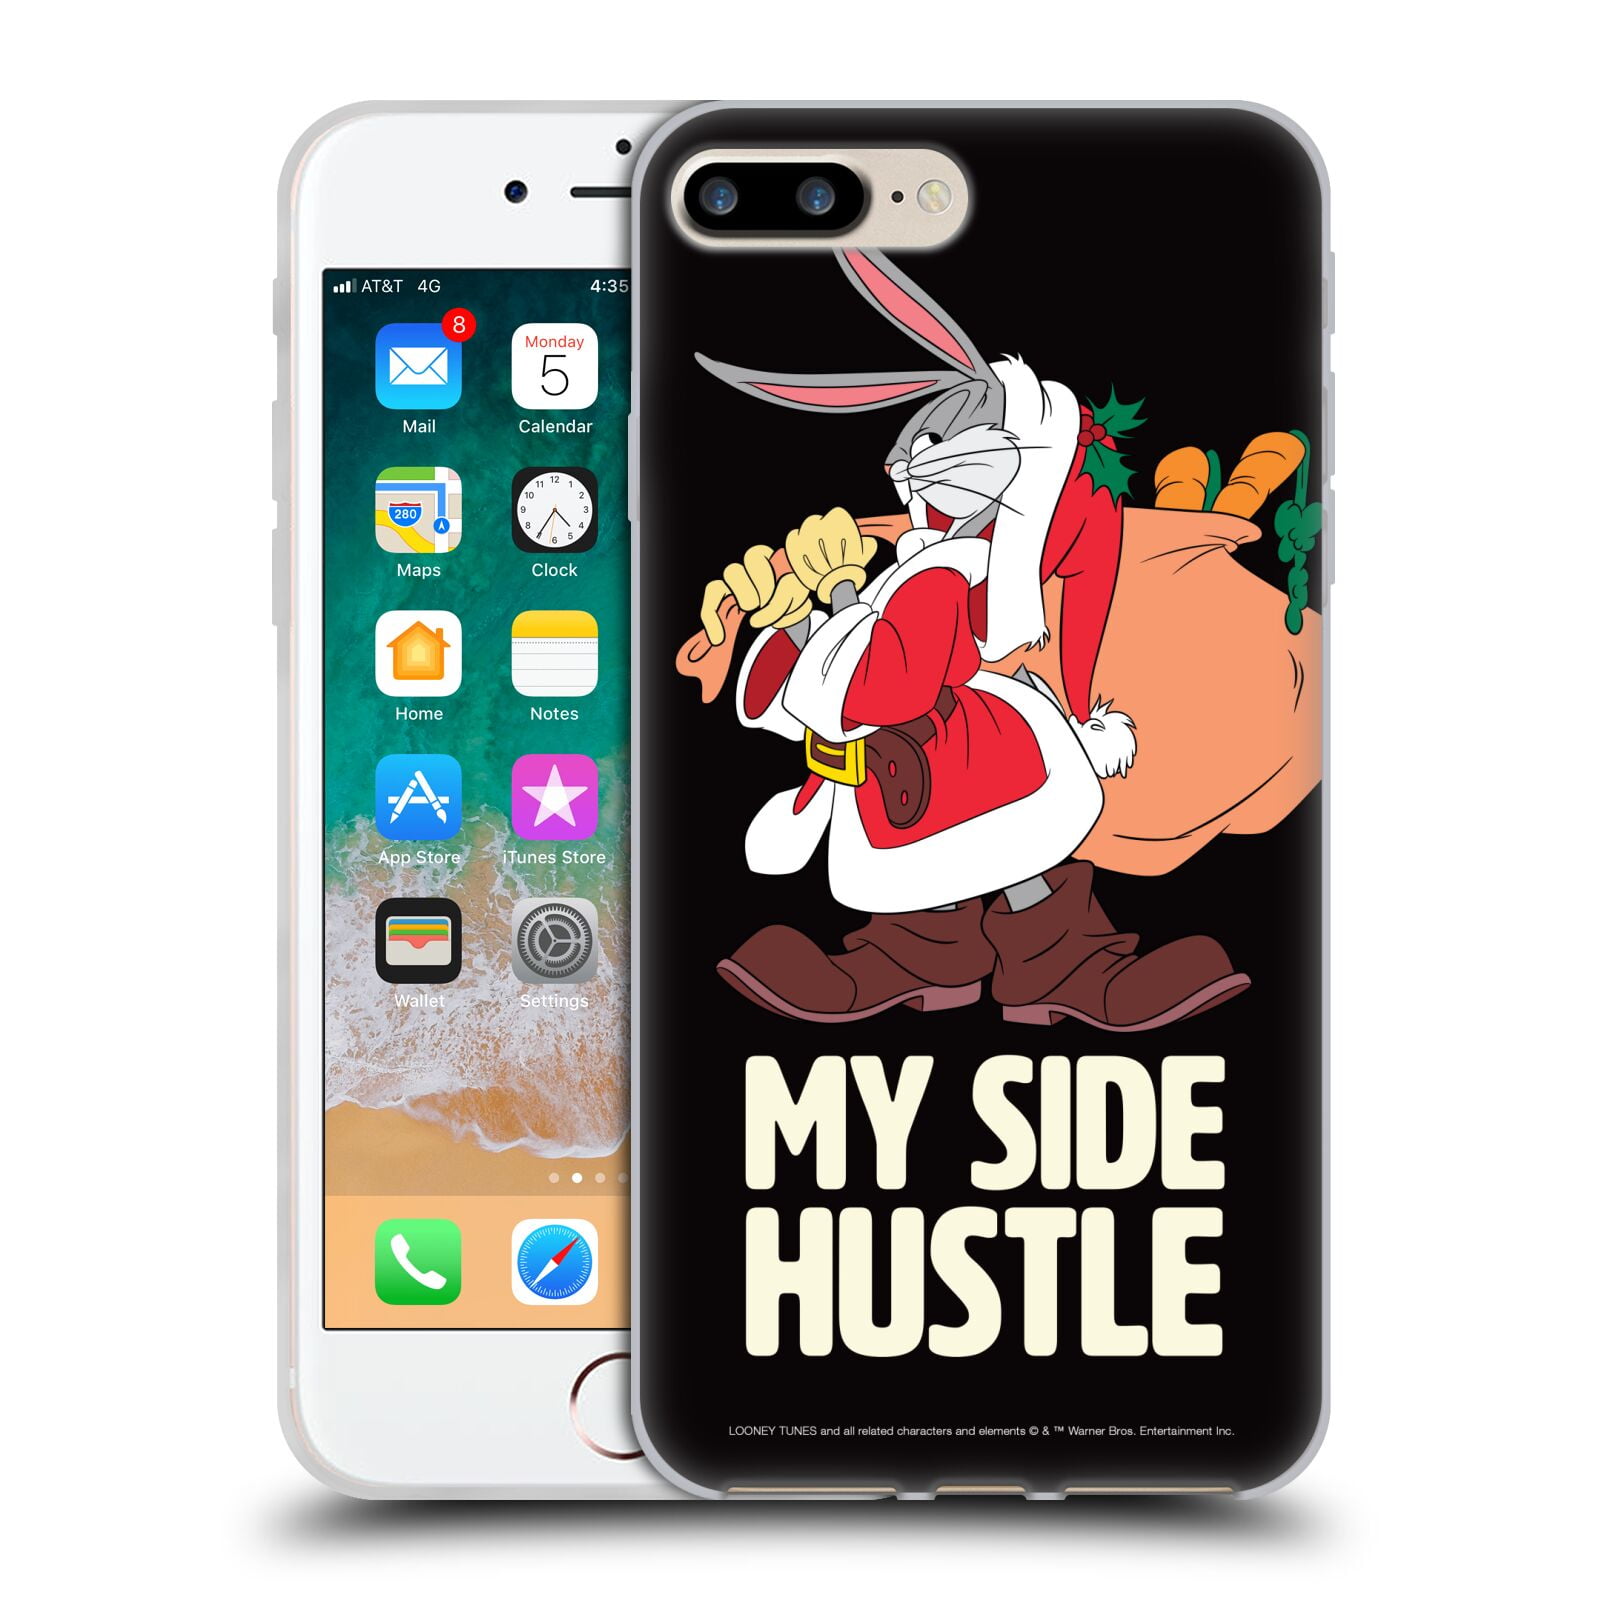 Bugs Bunny Hypebeast Hard Plastic Protective Clear Case Cover For